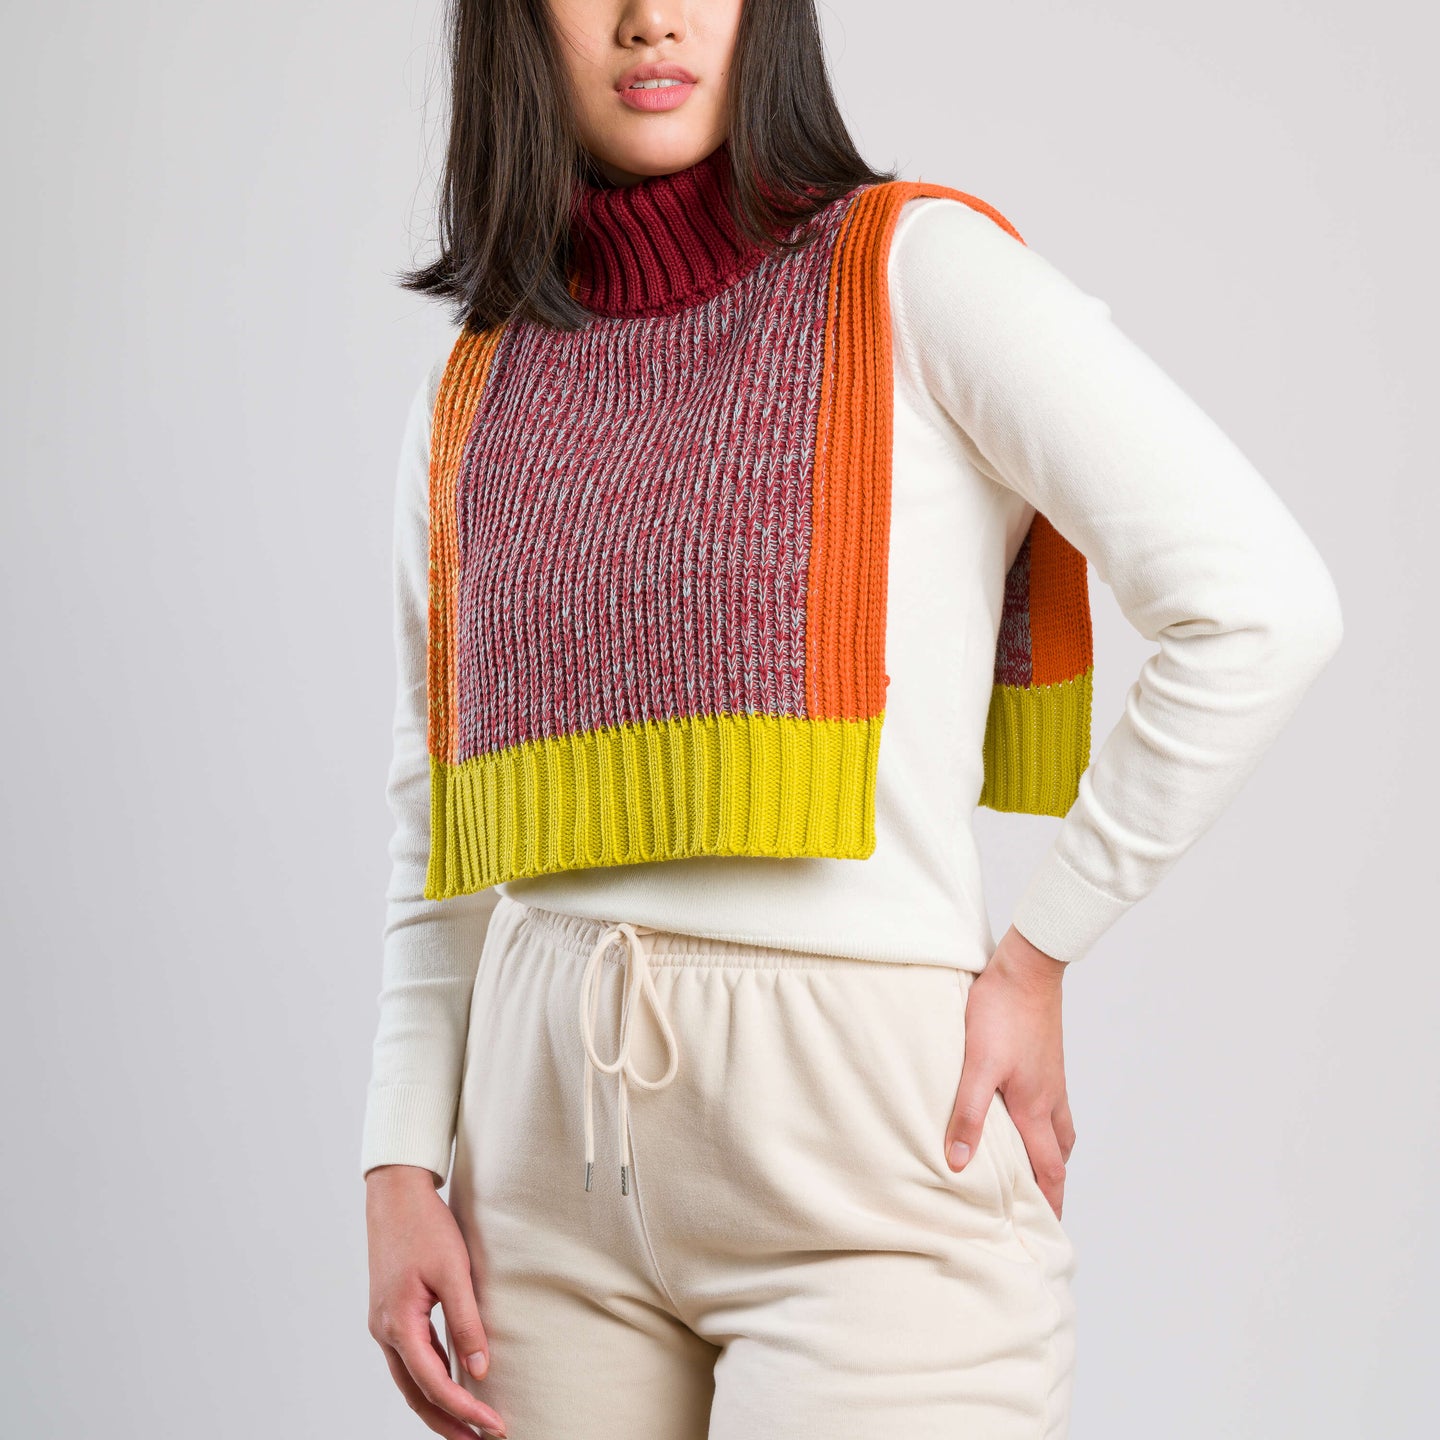 Knit Dickie Static Swatch Marled Tabard Turtleneck On Model How to wear